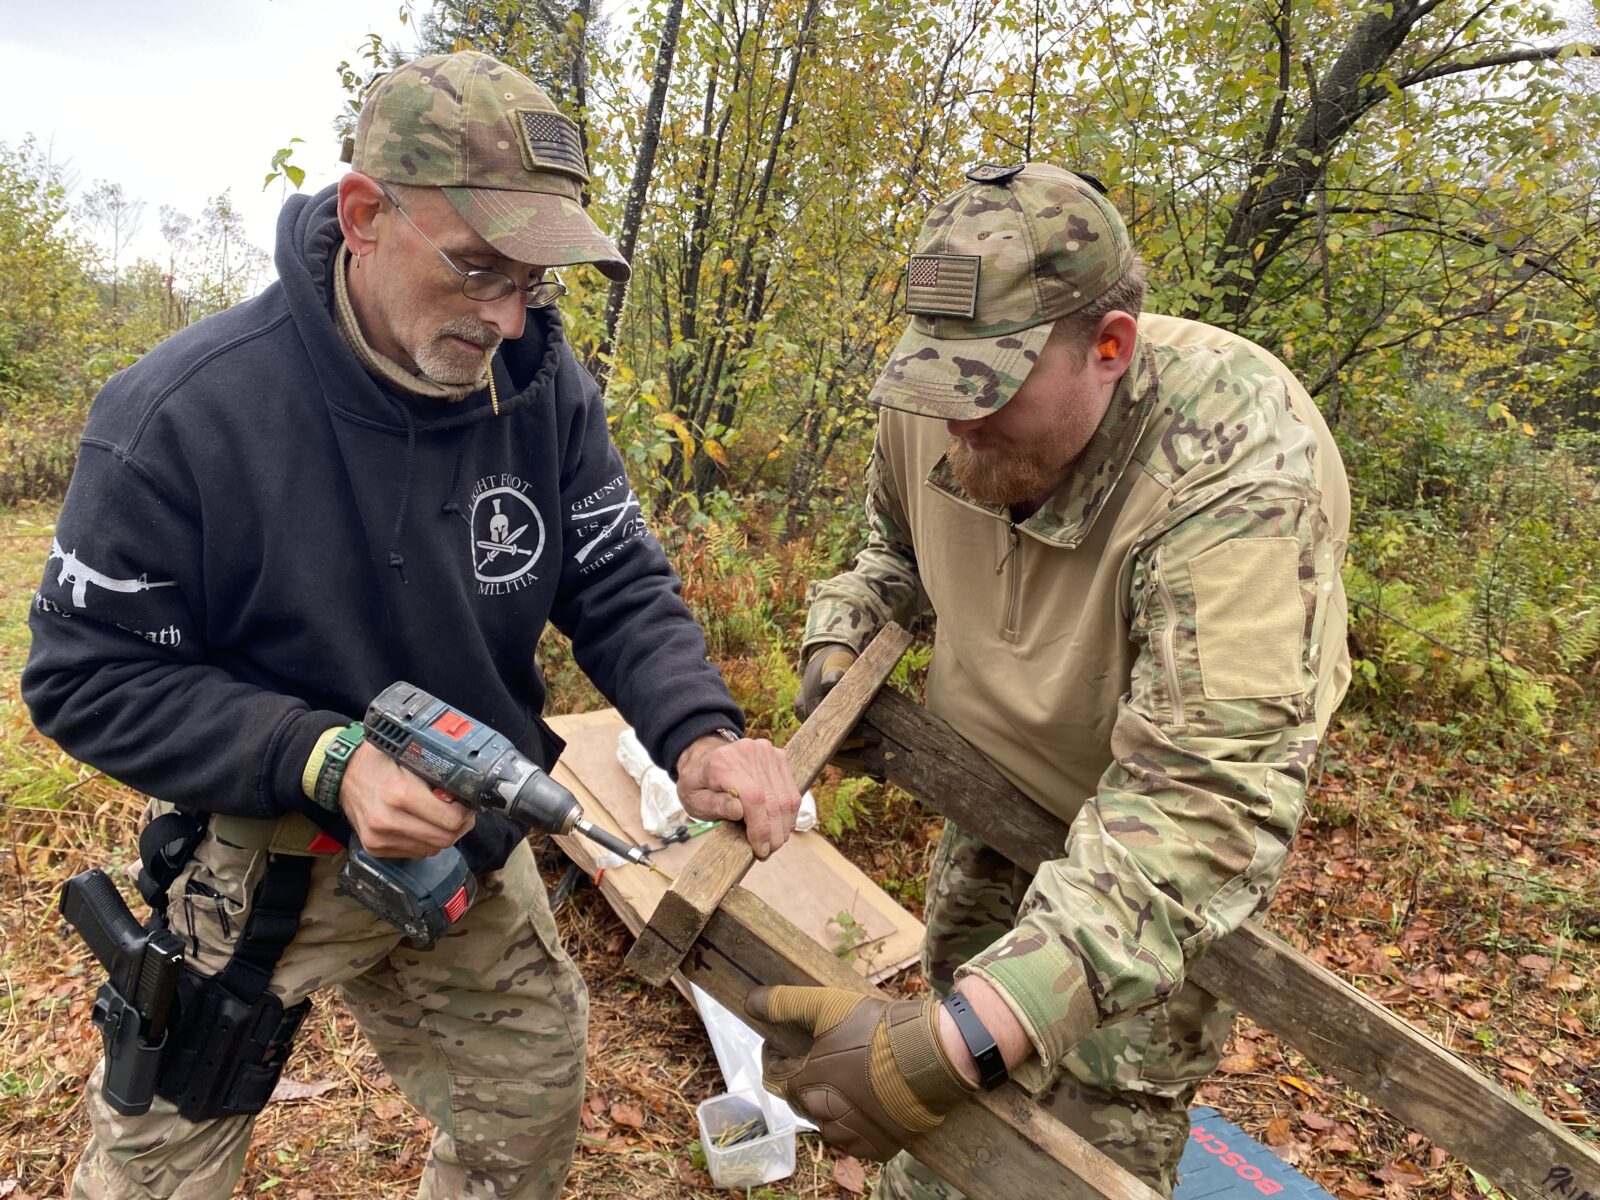 Members of the Pennsylvania Volunteer Militia build shooting targets for their monthly training deep in the woods. The group is led by Yingling, who played a role in the deadly Charlottesville, Va., "Unite the Right" rally in 2017 and was banned from returning to the city with a militia as a result of a lawsuit.